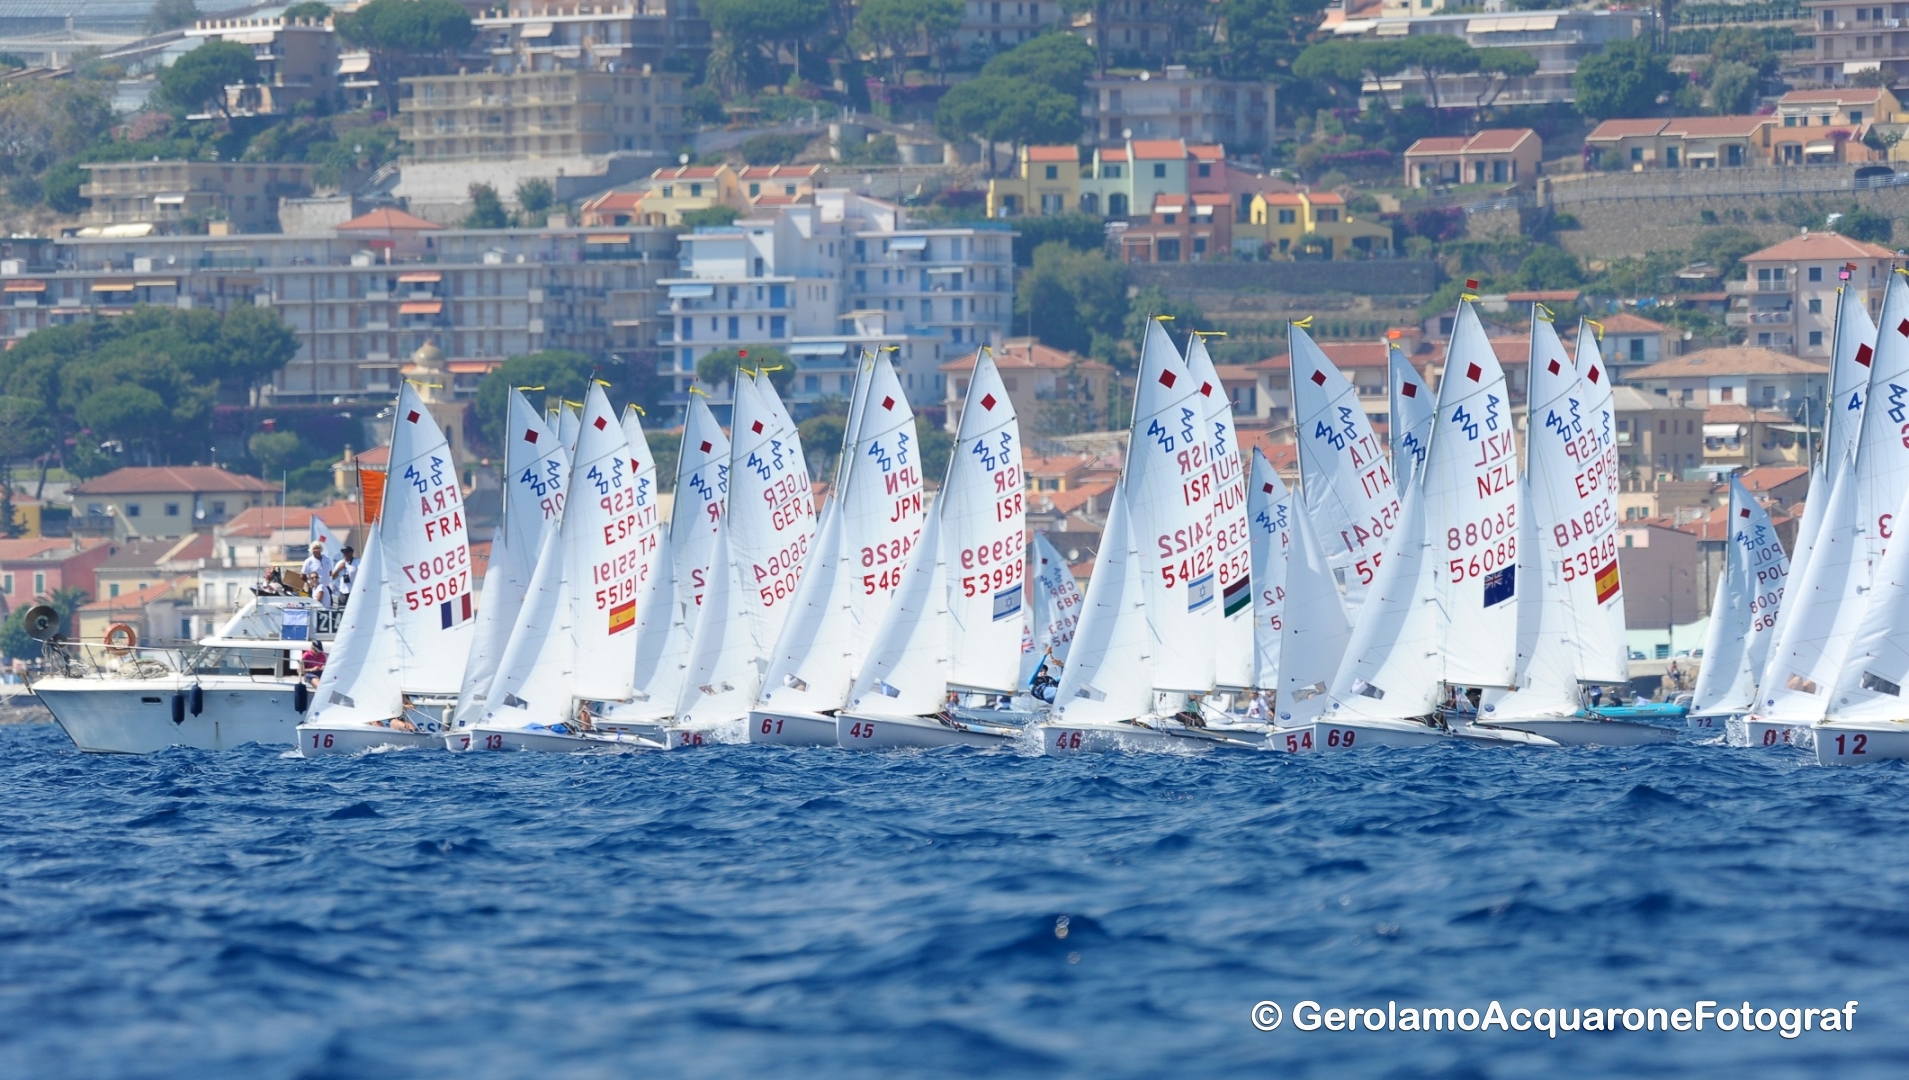 Racing on day 2 at 2016 420 World Championships